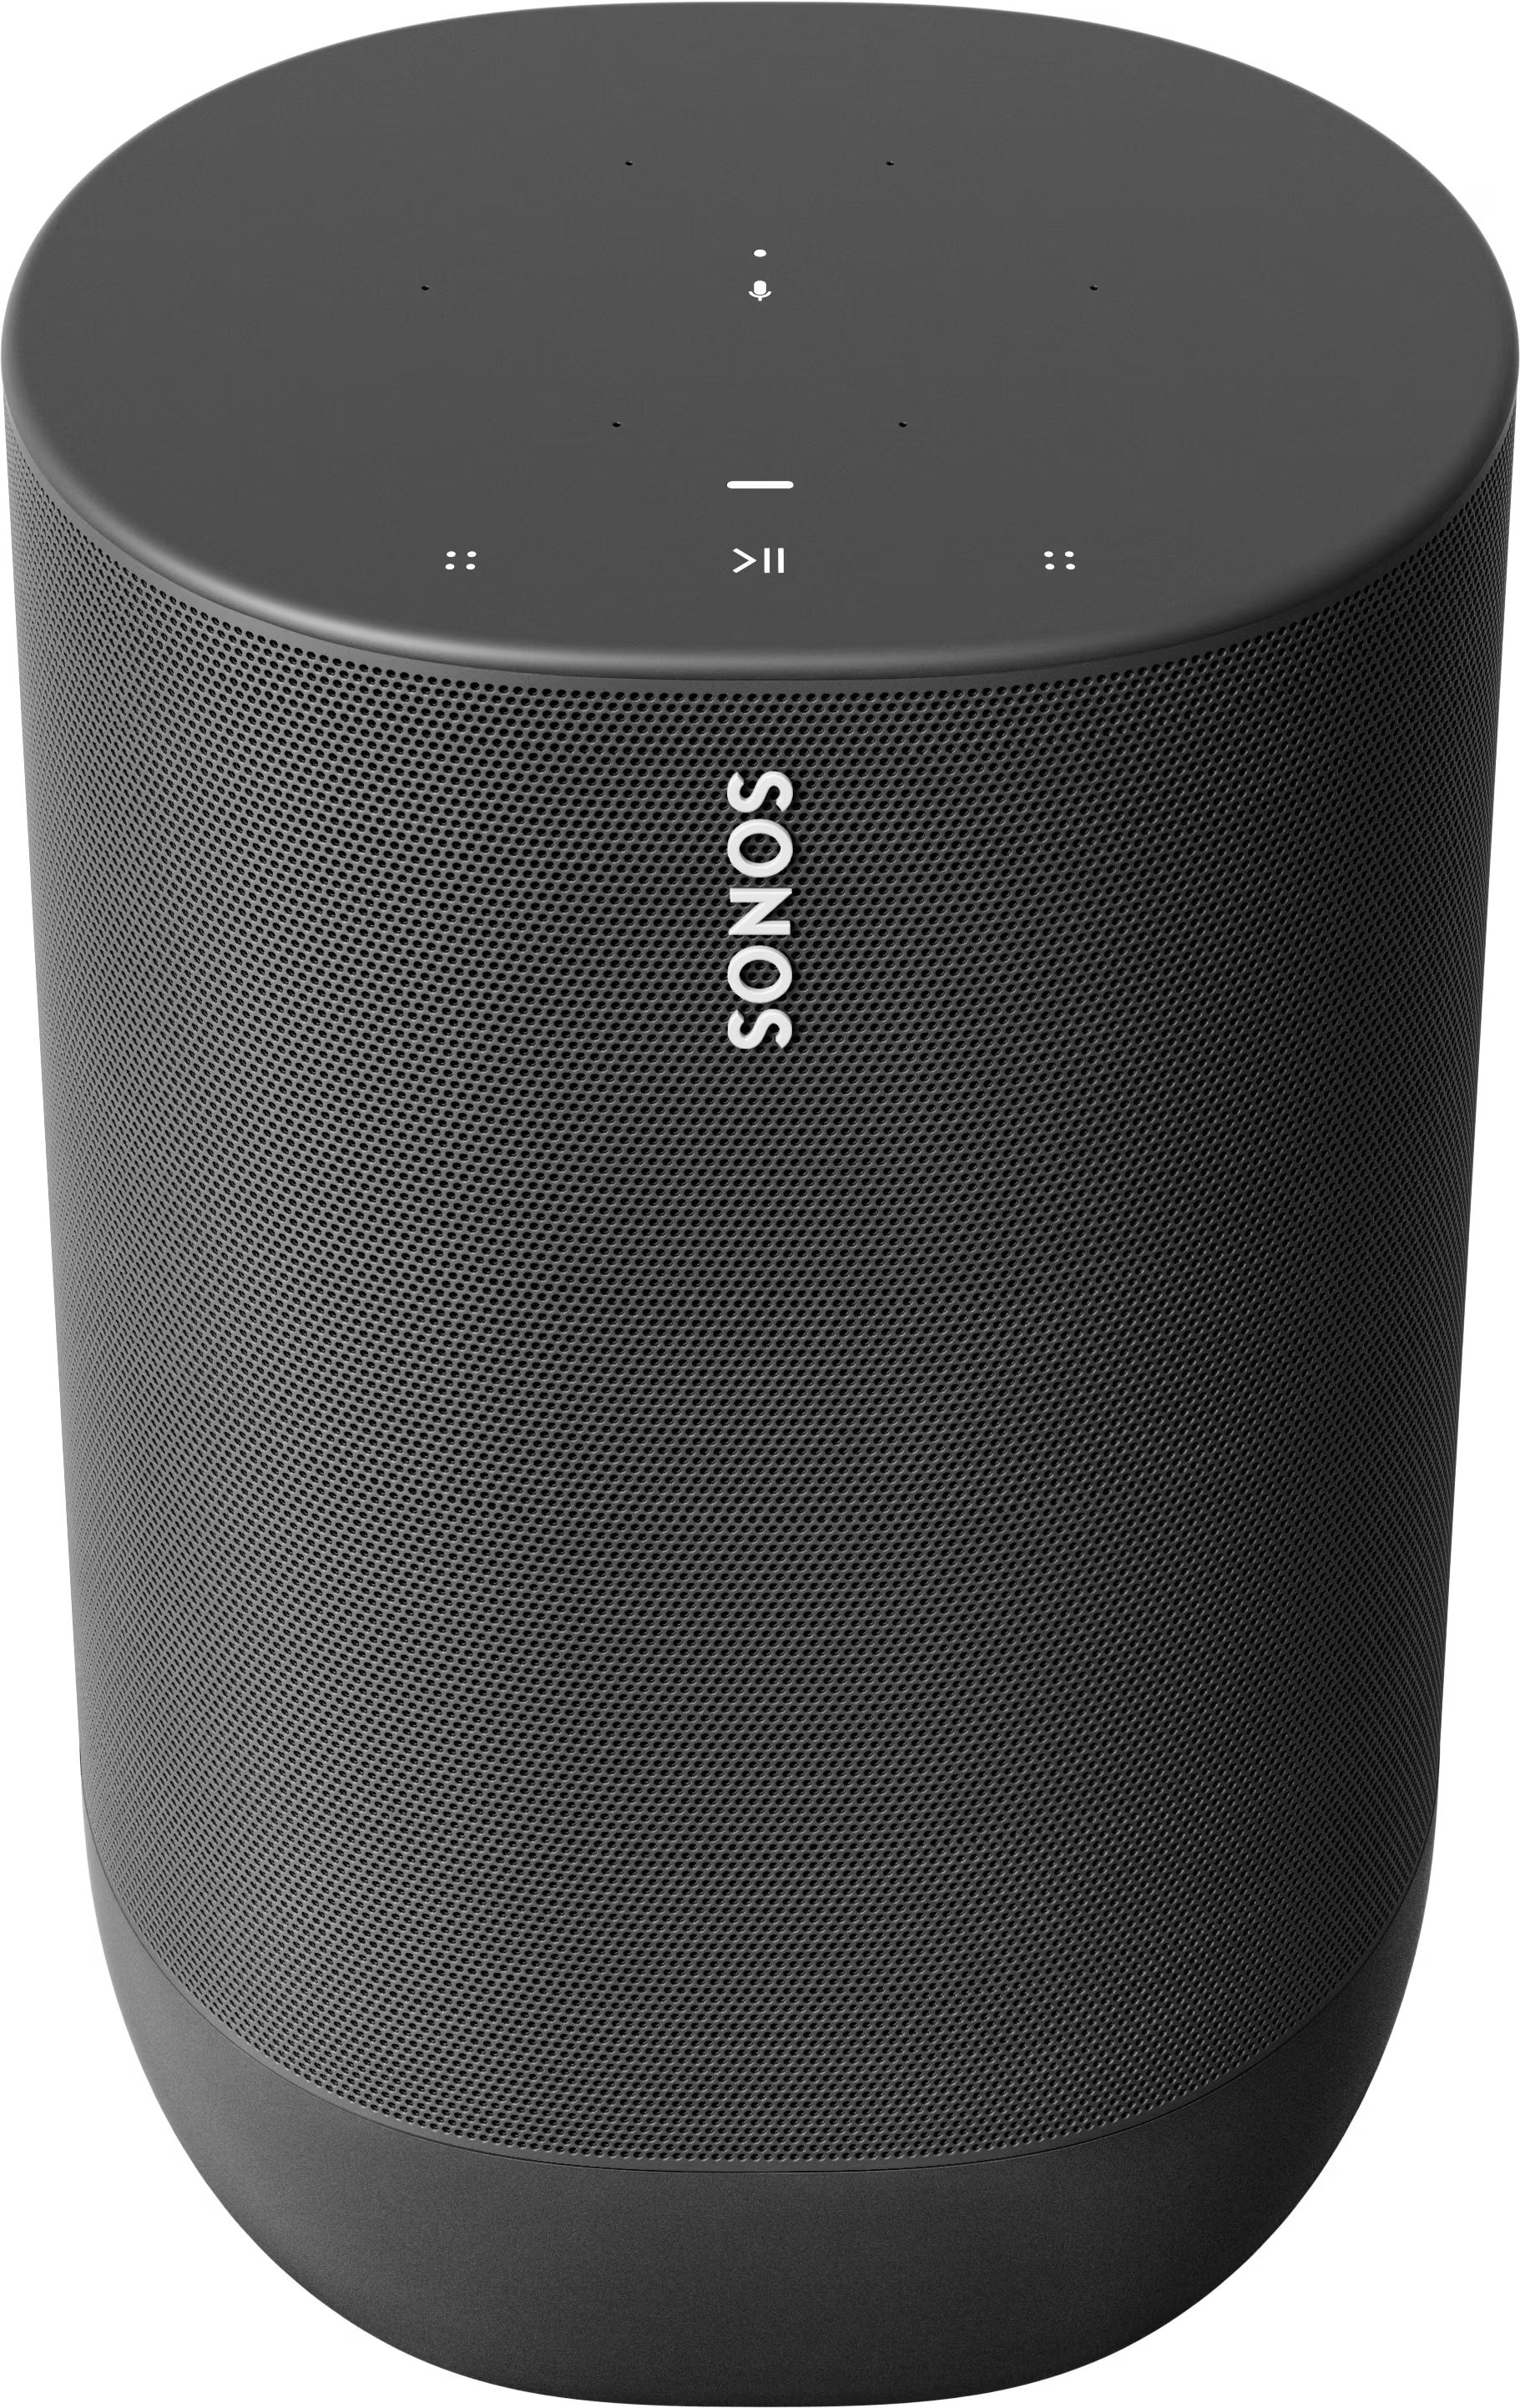 Move: The Best-Sounding Bluetooth Speaker in the World | Sonos | Sonos